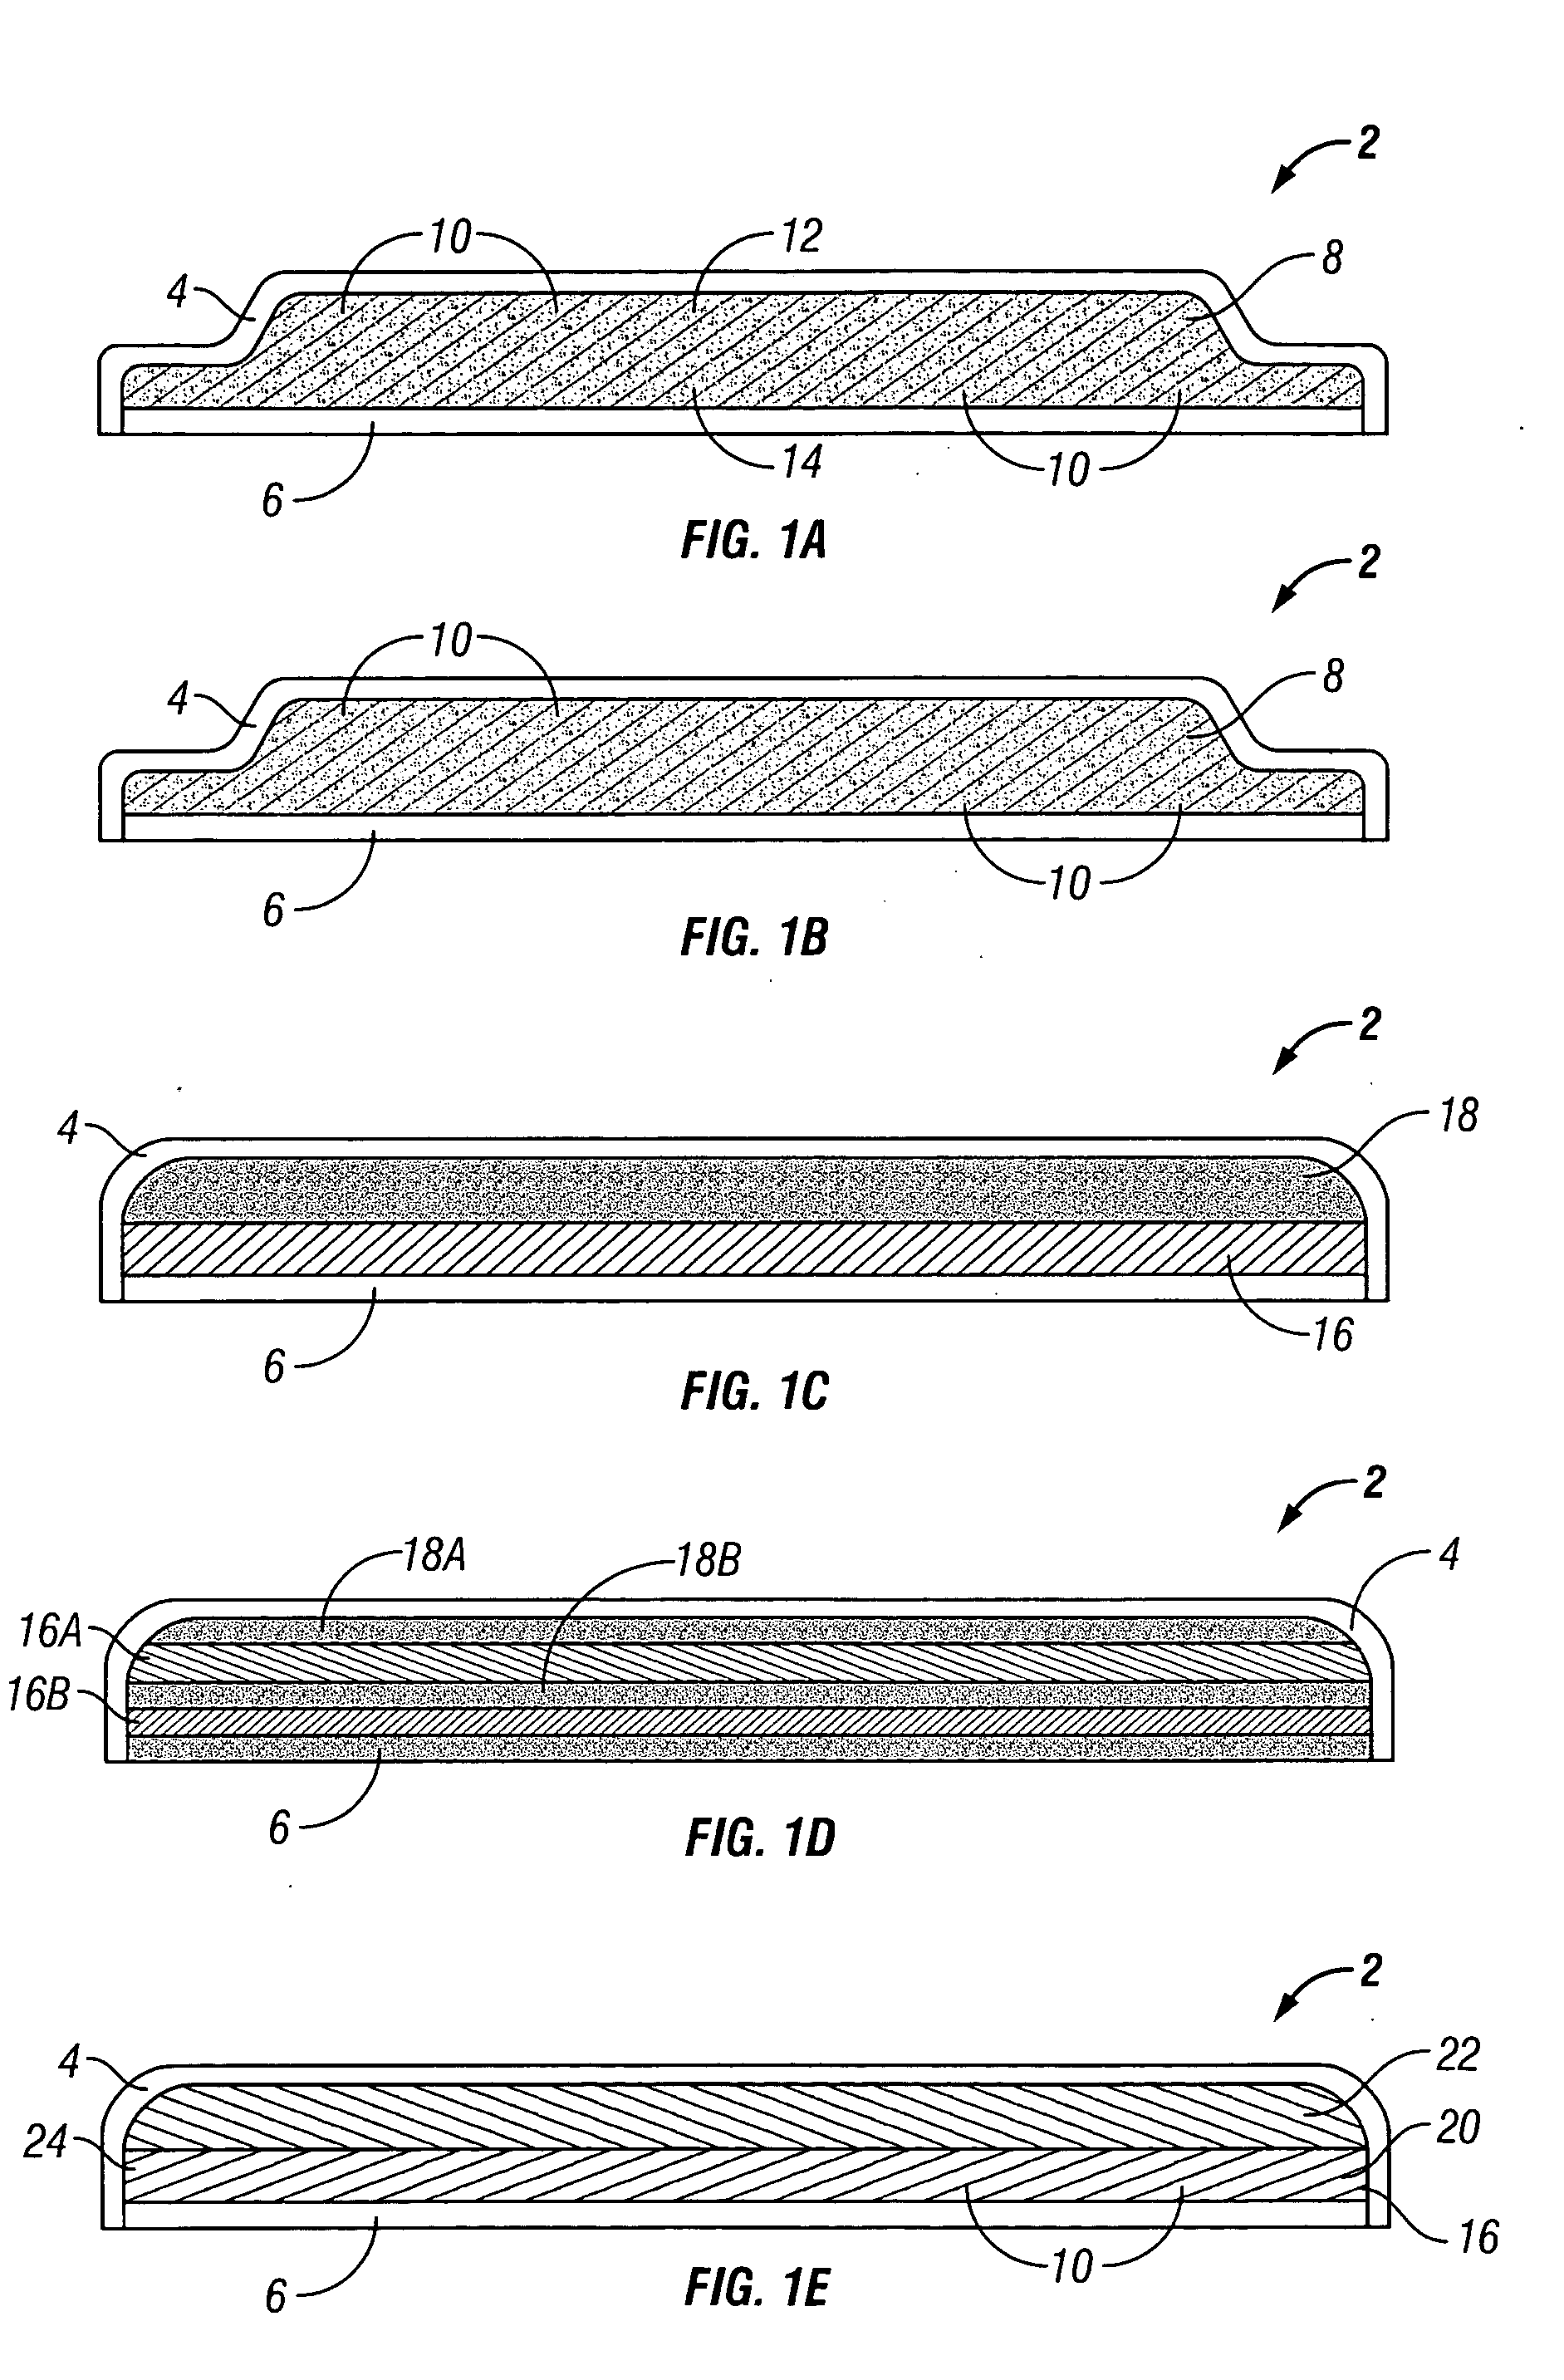 Dosage forms and layered deposition processes for fabricating dosage forms